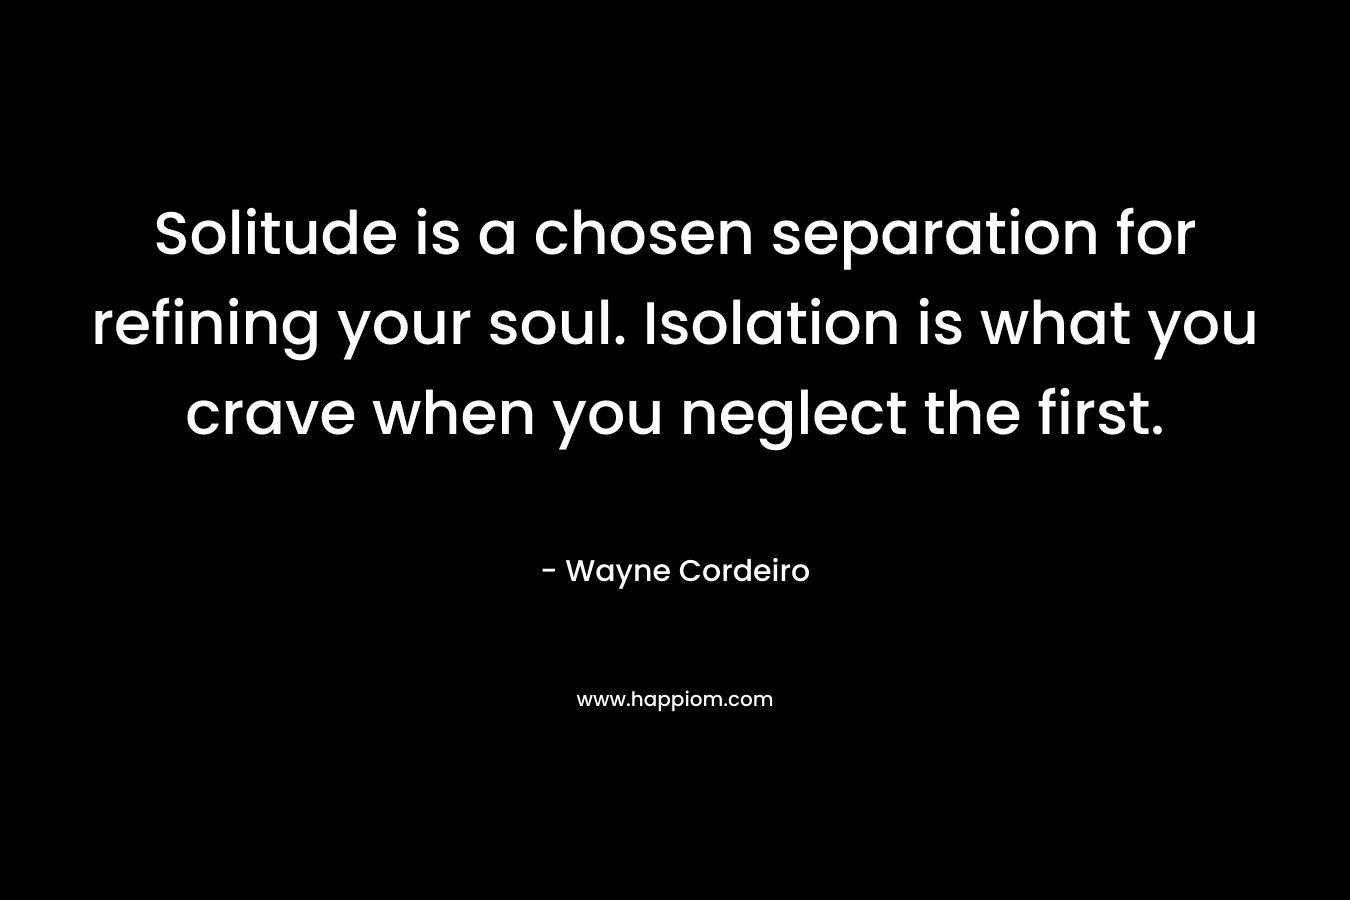 Solitude is a chosen separation for refining your soul. Isolation is what you crave when you neglect the first. – Wayne Cordeiro